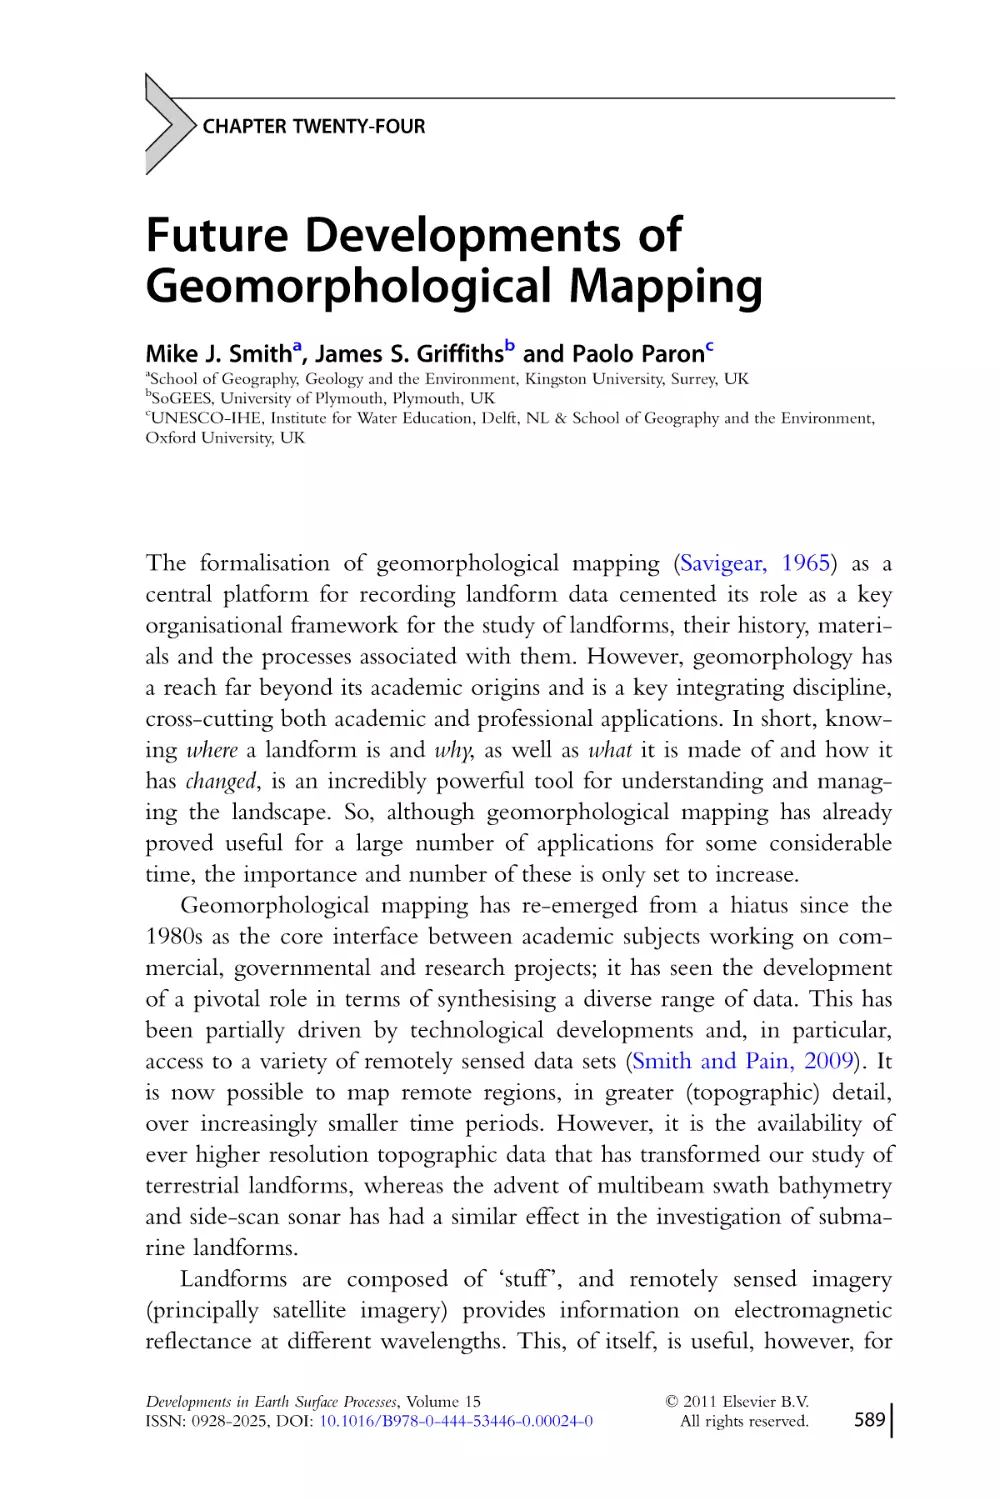 CHAPTER TWENTY-FOUR.
Future Developments of
Geomorphological Mapping